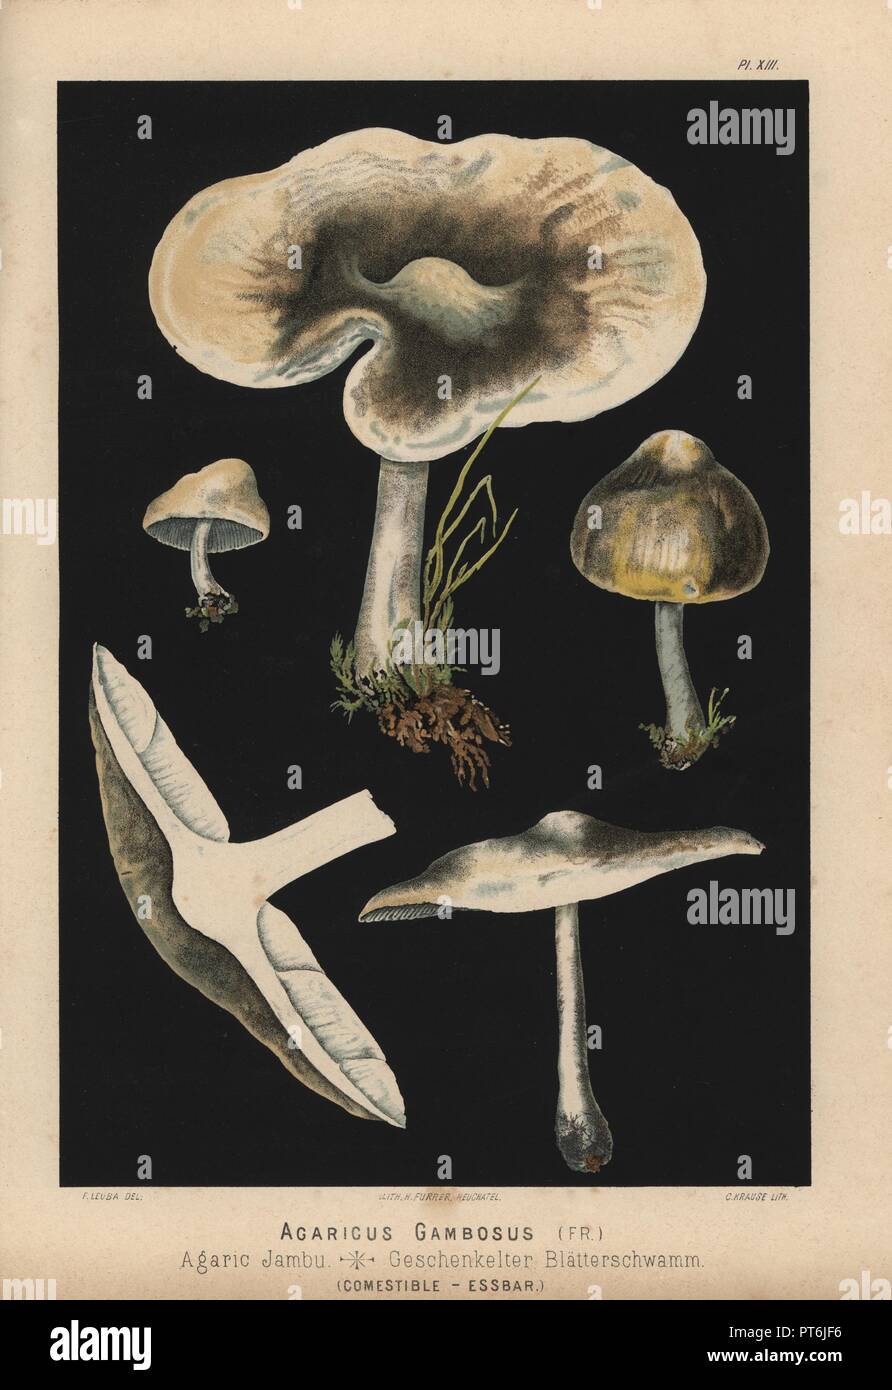 St. George's mushroom, Calocybe gambosa, Agaricus gambosus, Agaric jambu. Chromolithograph by C. Krause of an illustration by Fritz Leuba from 'Les champignons comestibles et les especes vénéneuses avec lesquelles ils pourraient etre confondus' (Edible mushrooms and the poisonous species they should not be confused with), Delachaux et Niestle, Neuchatel, Switzerland, 1890, lithographed by H. Furrer. Fritz Leuba (1848-1910) was a mycologist and artist from Neuchatel, Switzerland. Stock Photo